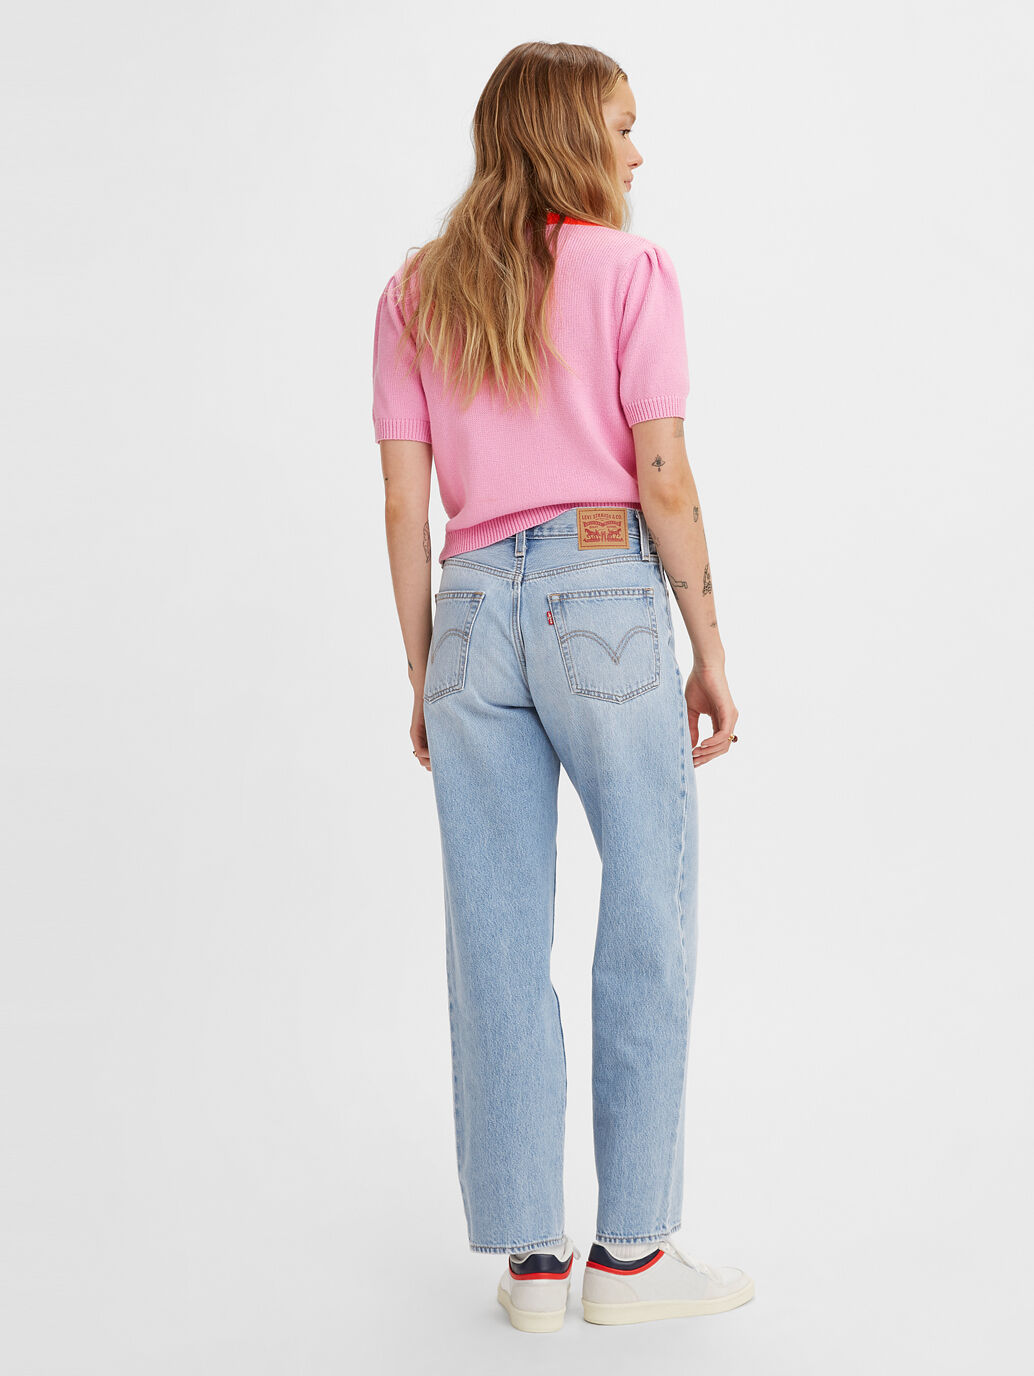 Women's Baggy Dad Jeans - Casual & Comfortable Fit Jeans